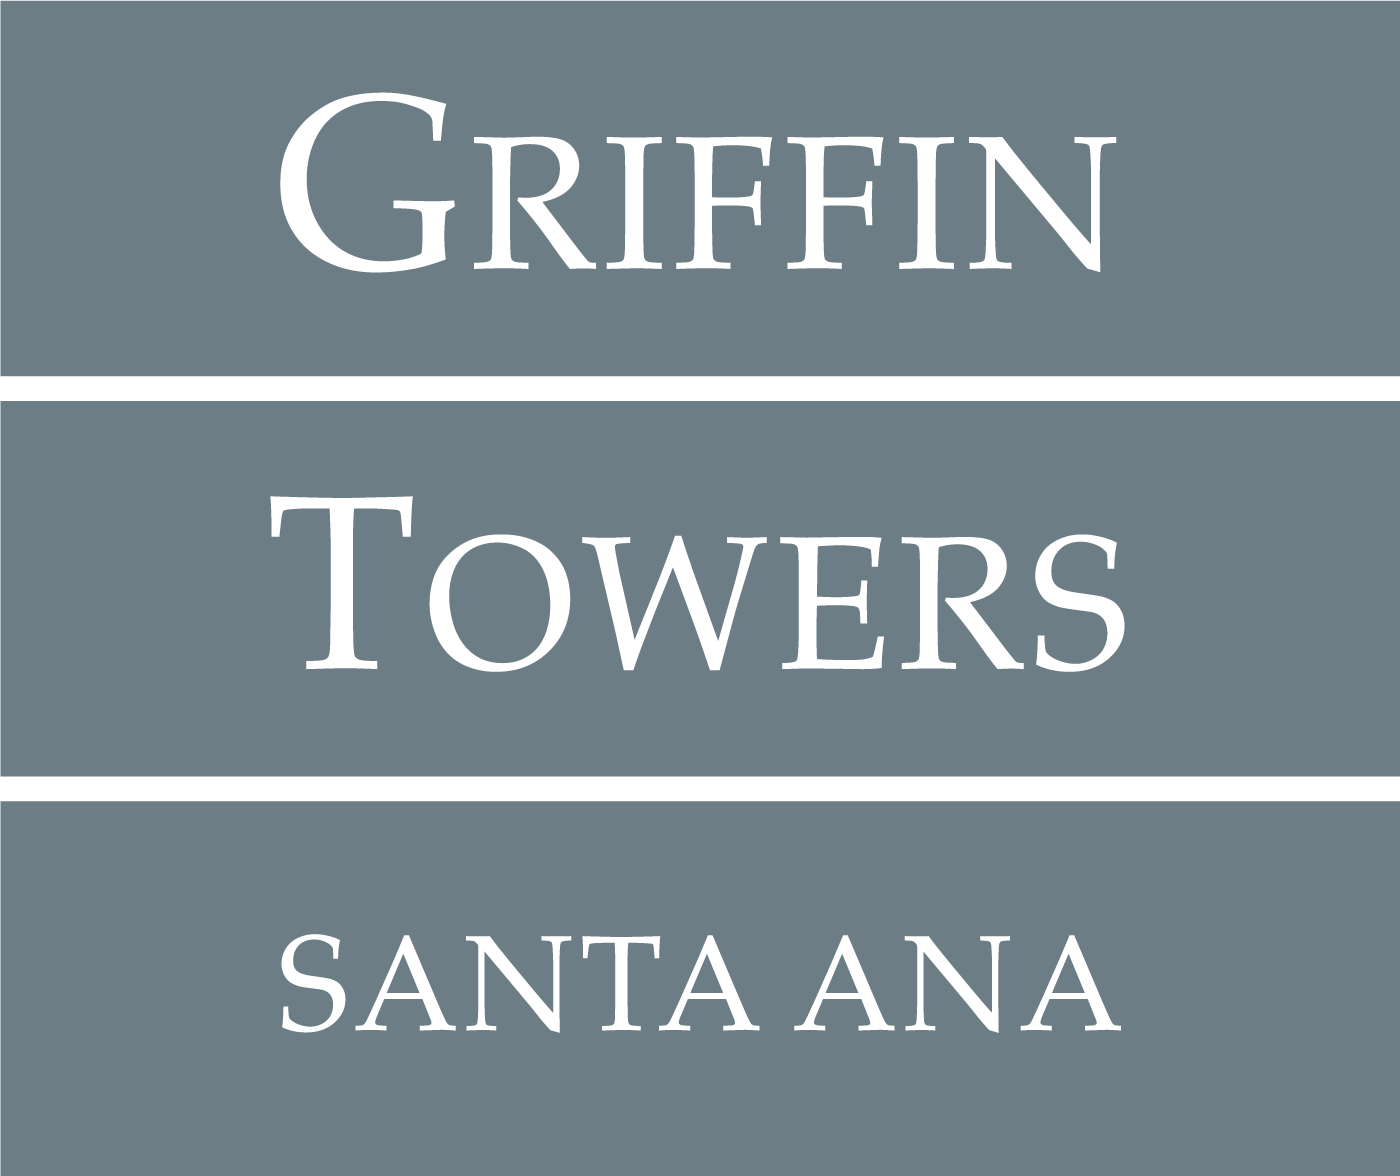 GRIFFIN TOWERS